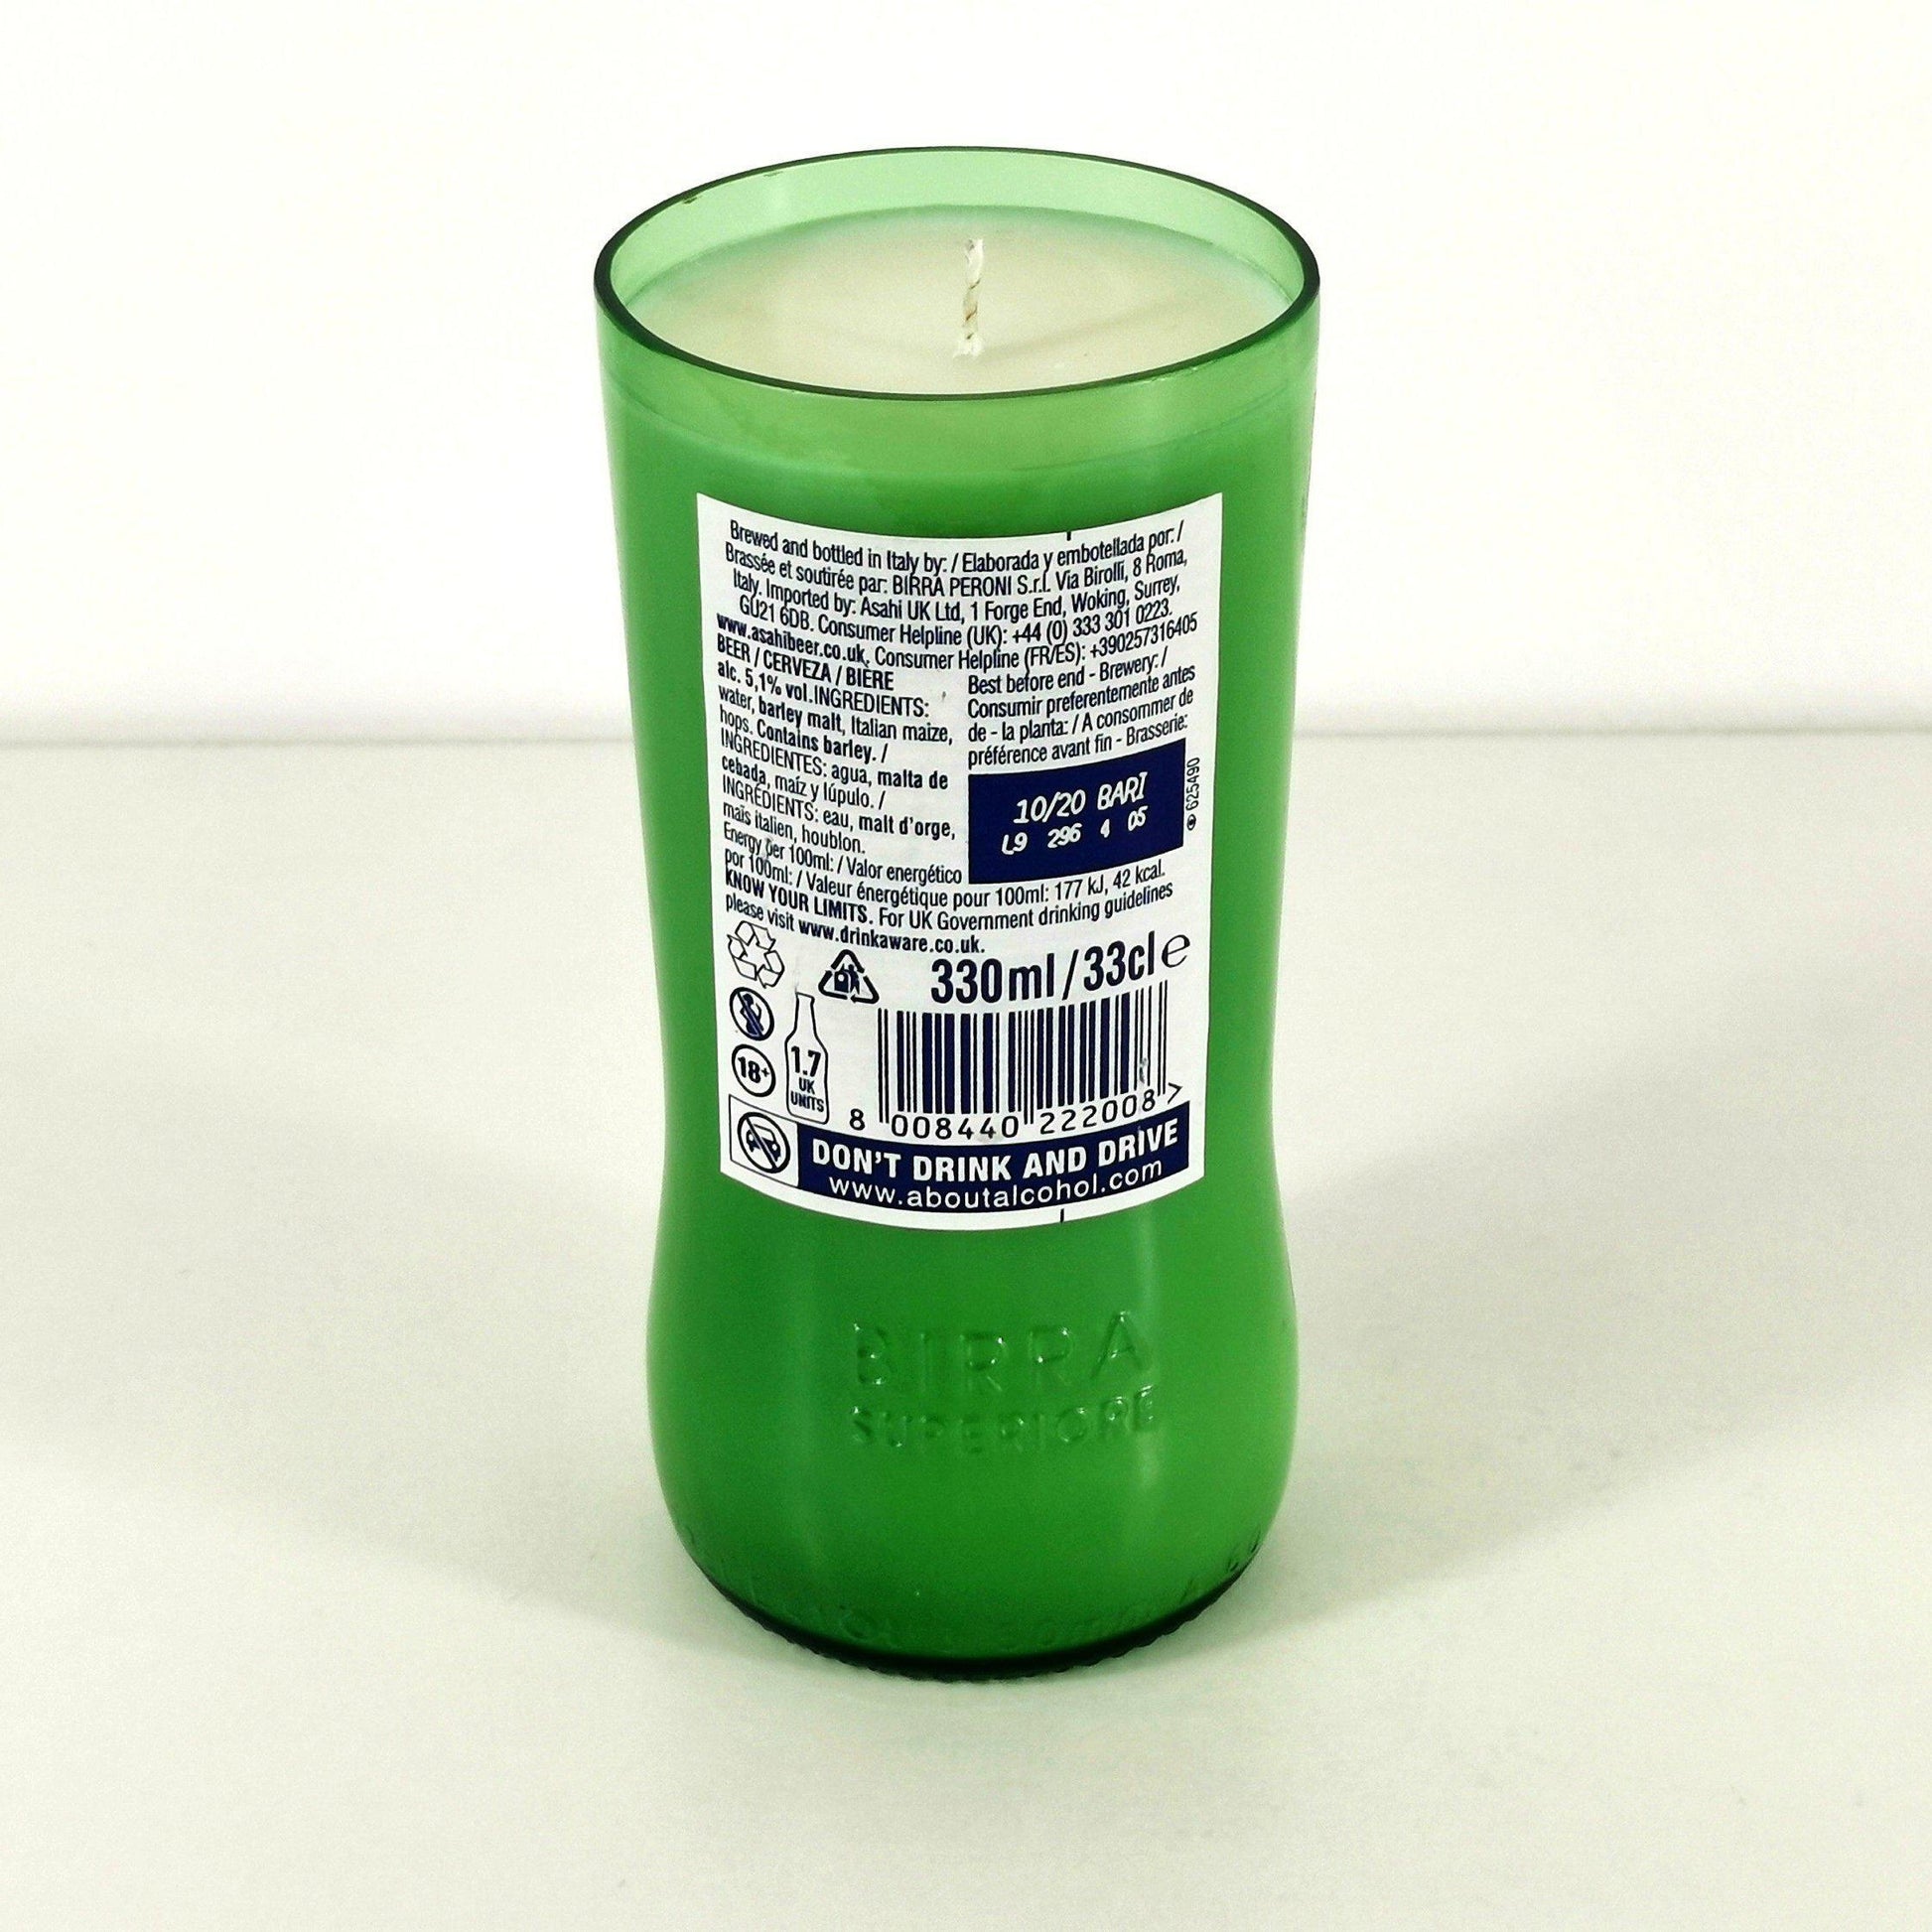 Peroni Small Beer Bottle Candle Beer & Ale Bottle Candles Adhock Homeware